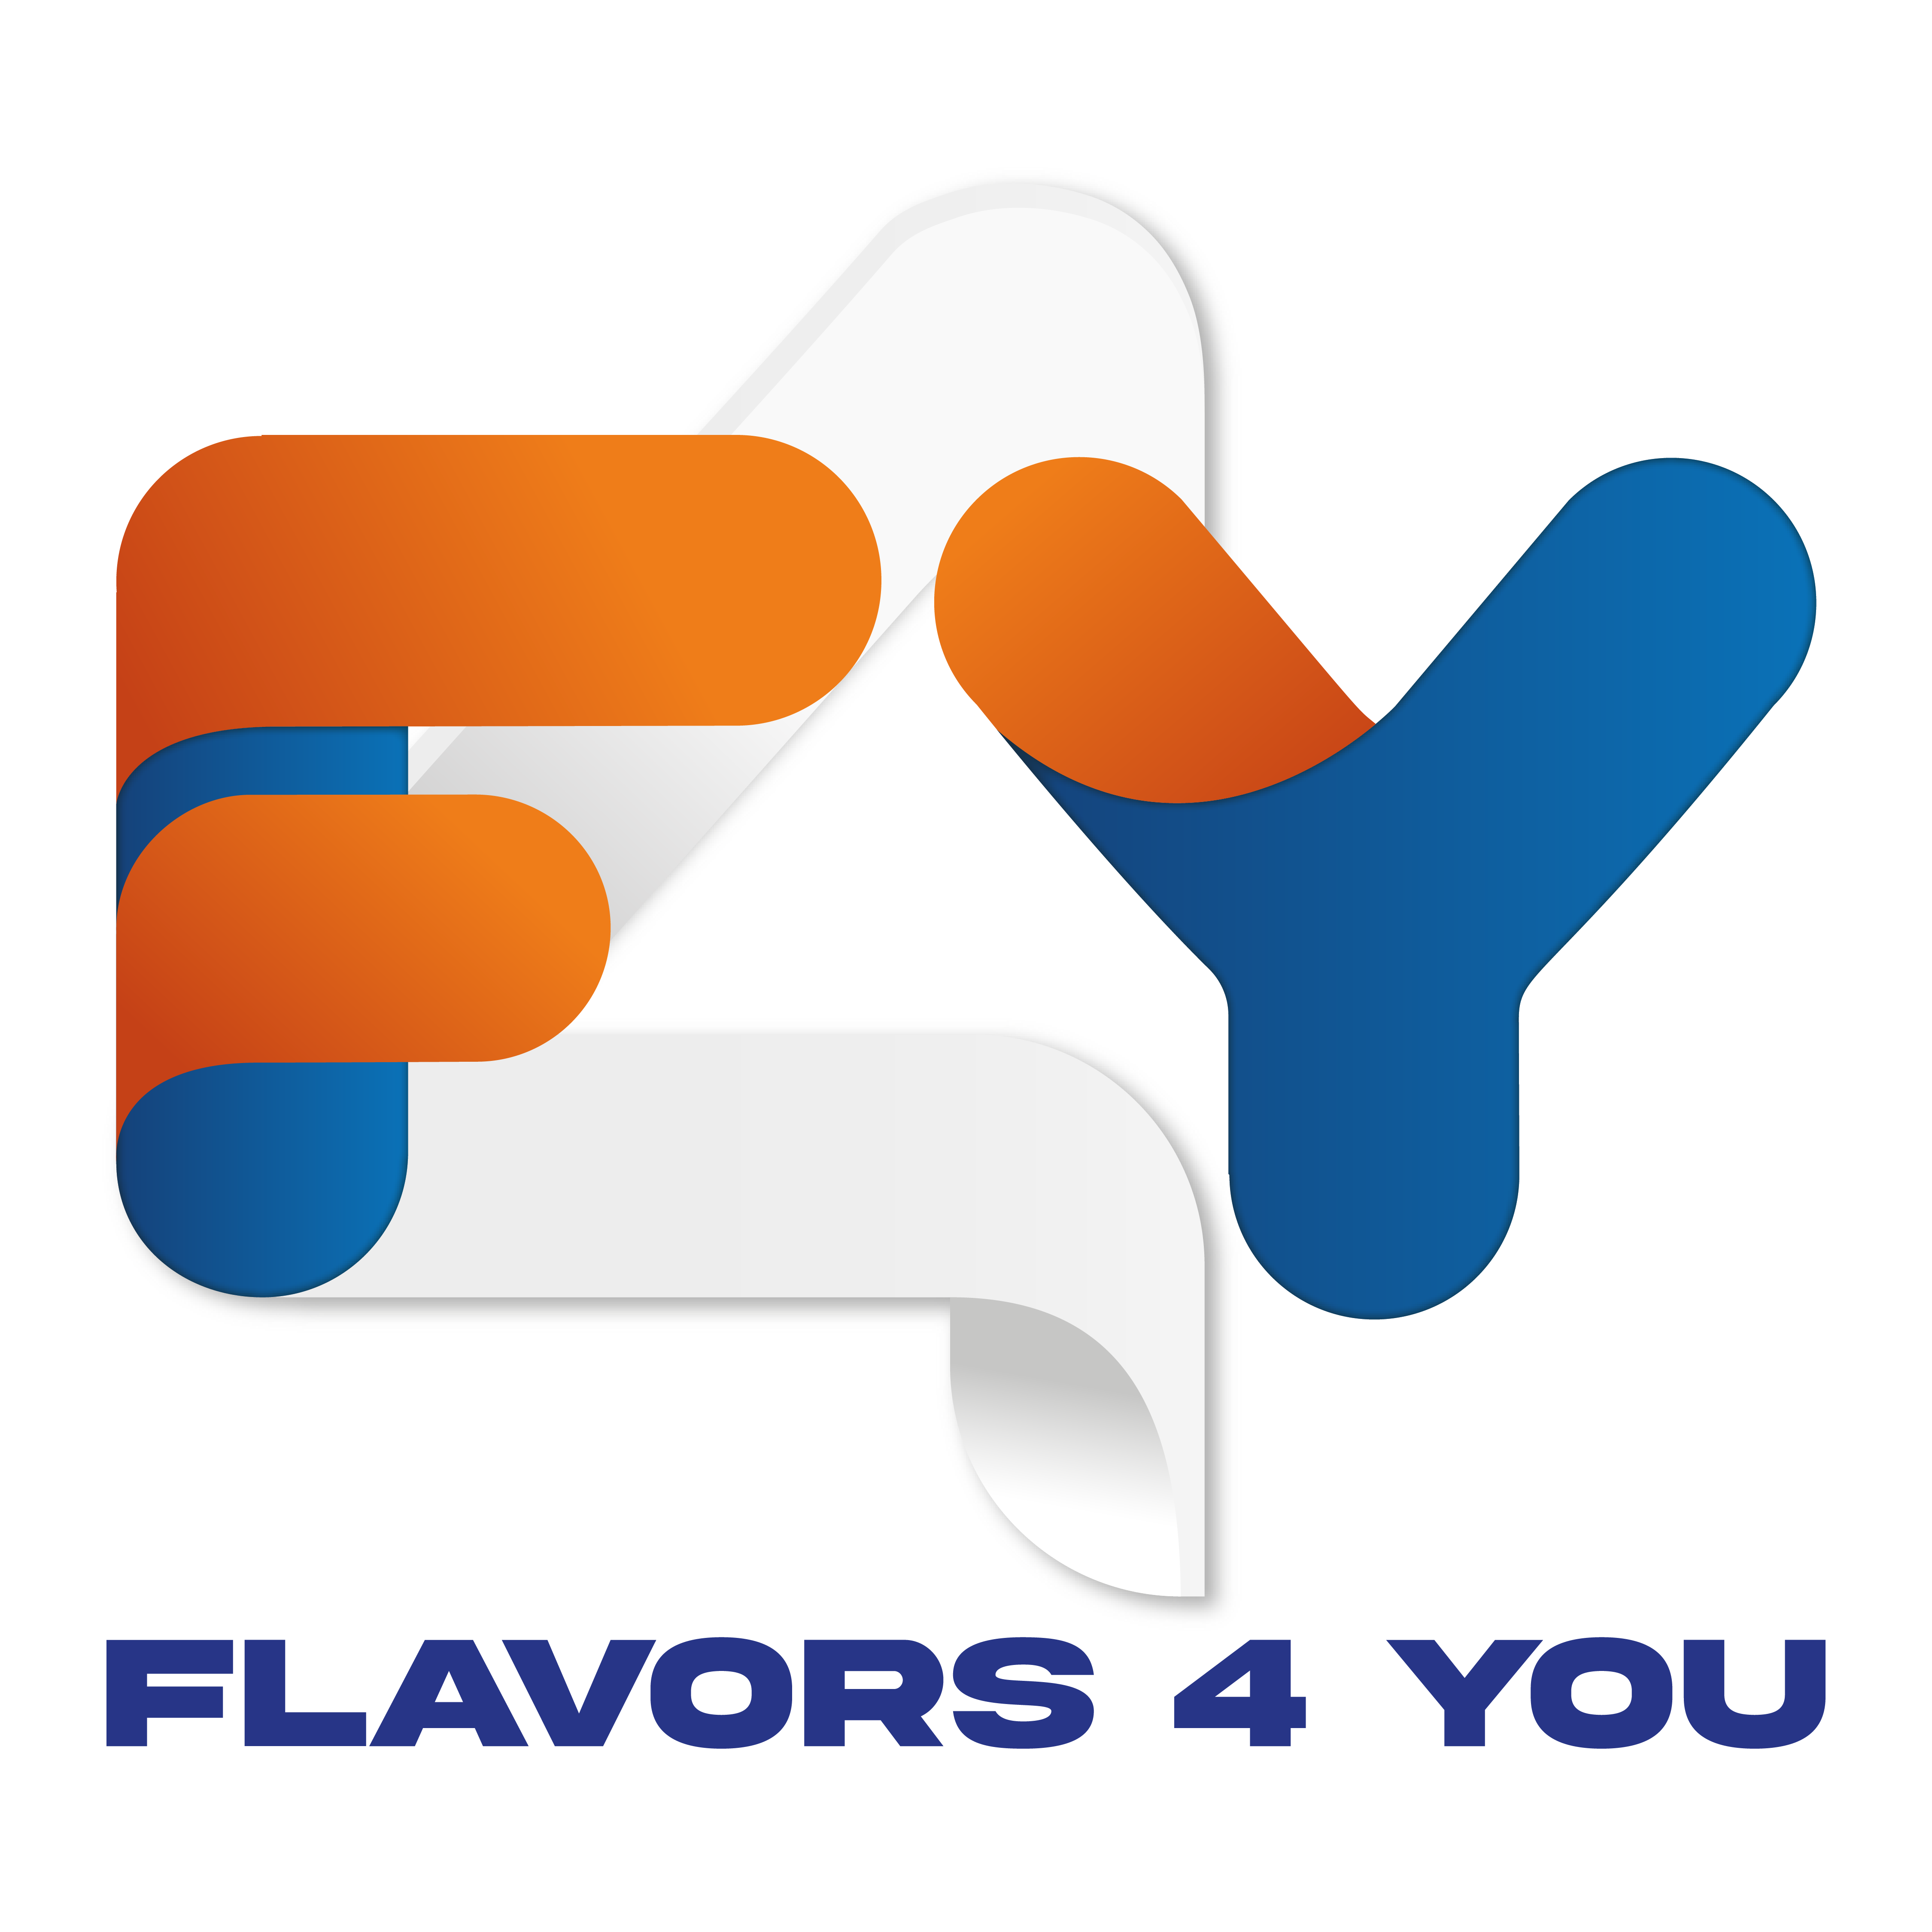 FLAVORS%20FOR%20YOU%20PNG_Tavola%20disegno%201.png